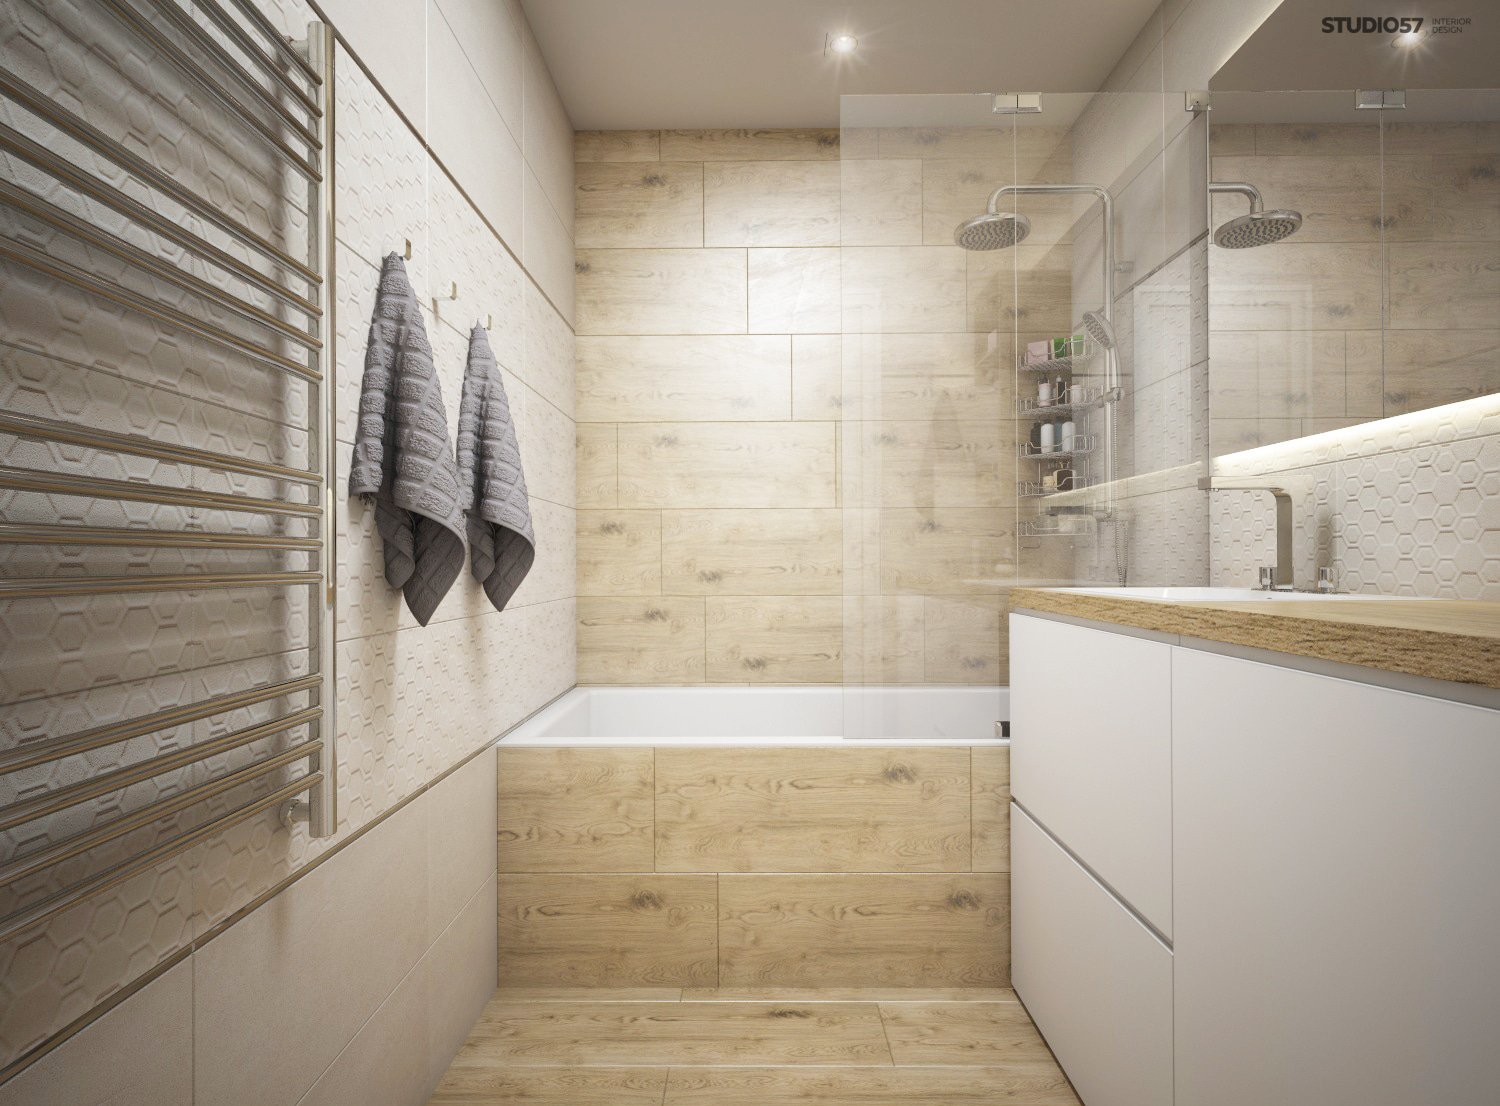 Bathroom in a modern classic style image